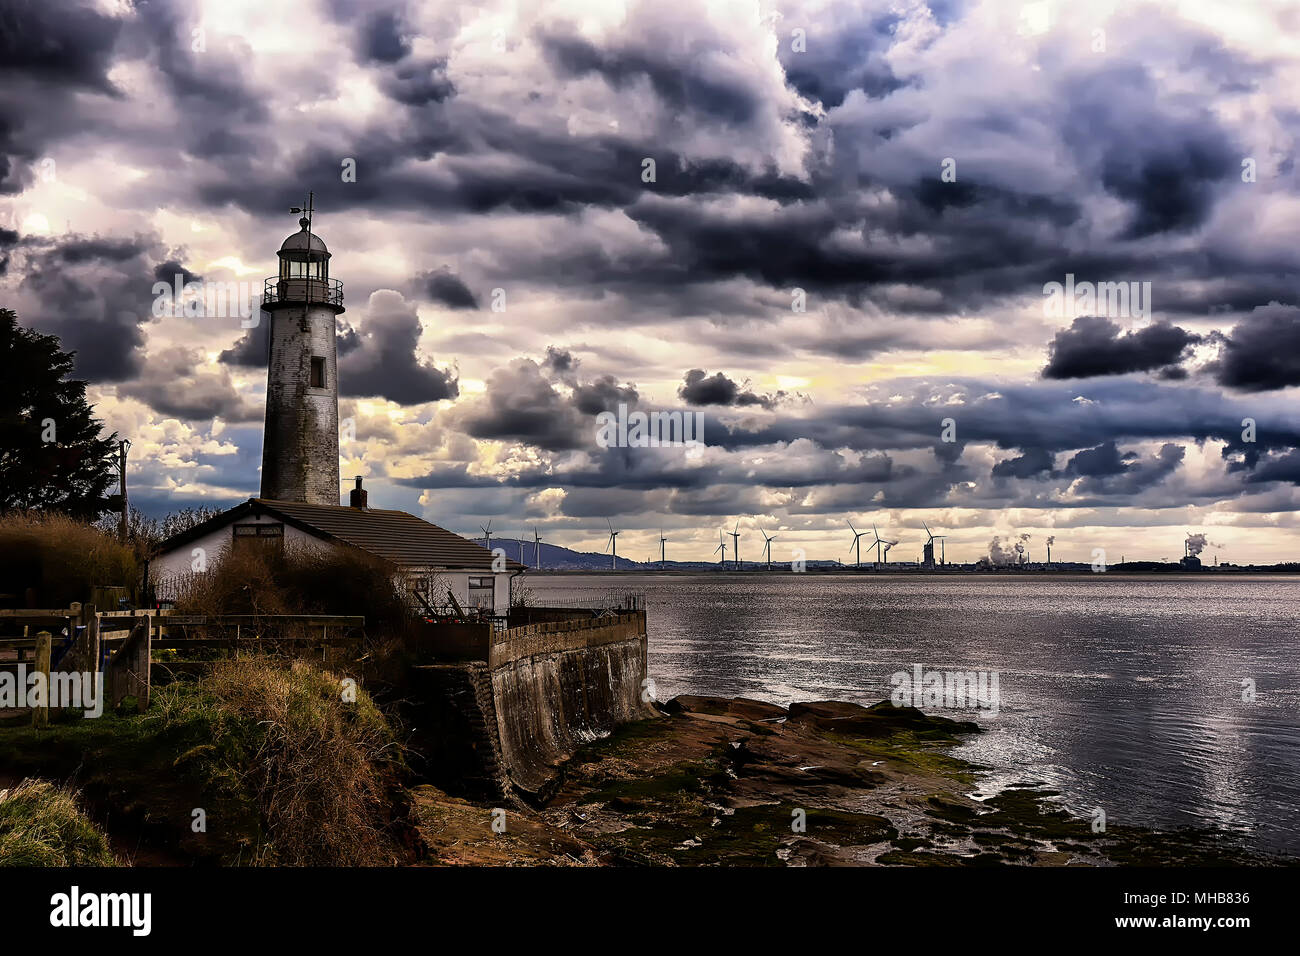 old Lighthouse with storm clouds. Hale head lighthouse Liverpool, Merseyside. Stock Photo